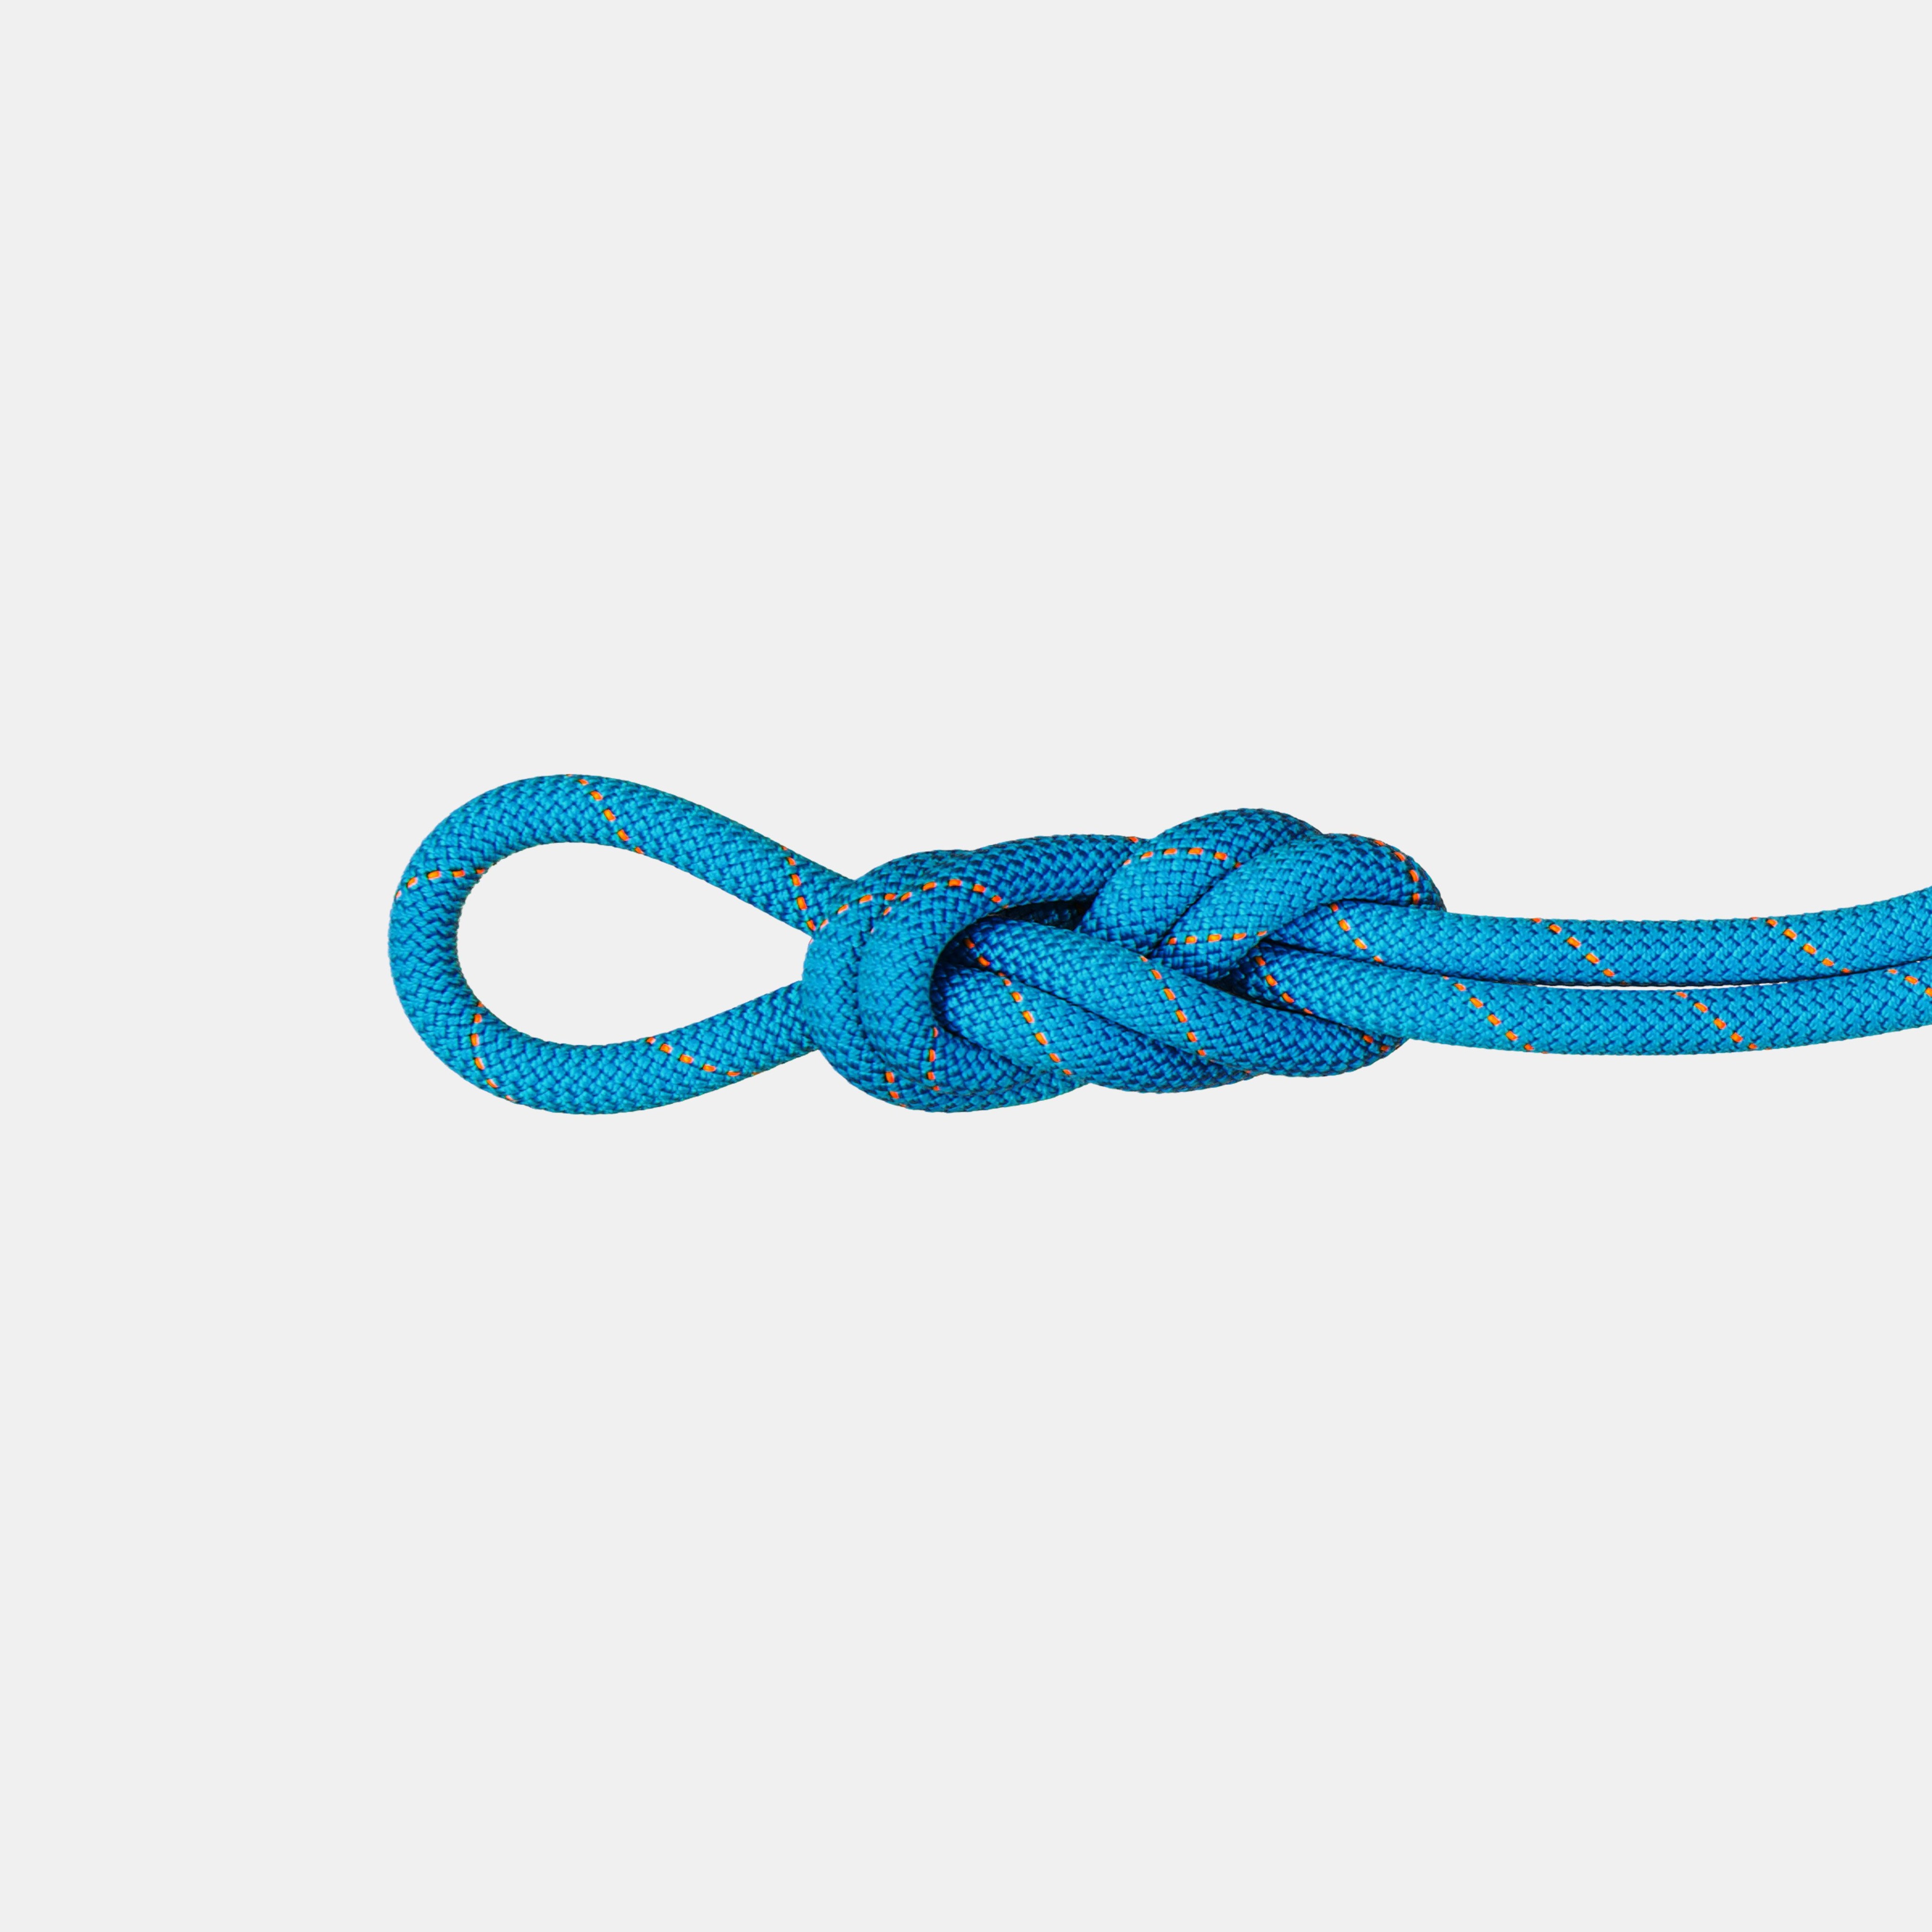 9.9 Gym Workhorse Dry Rope product image